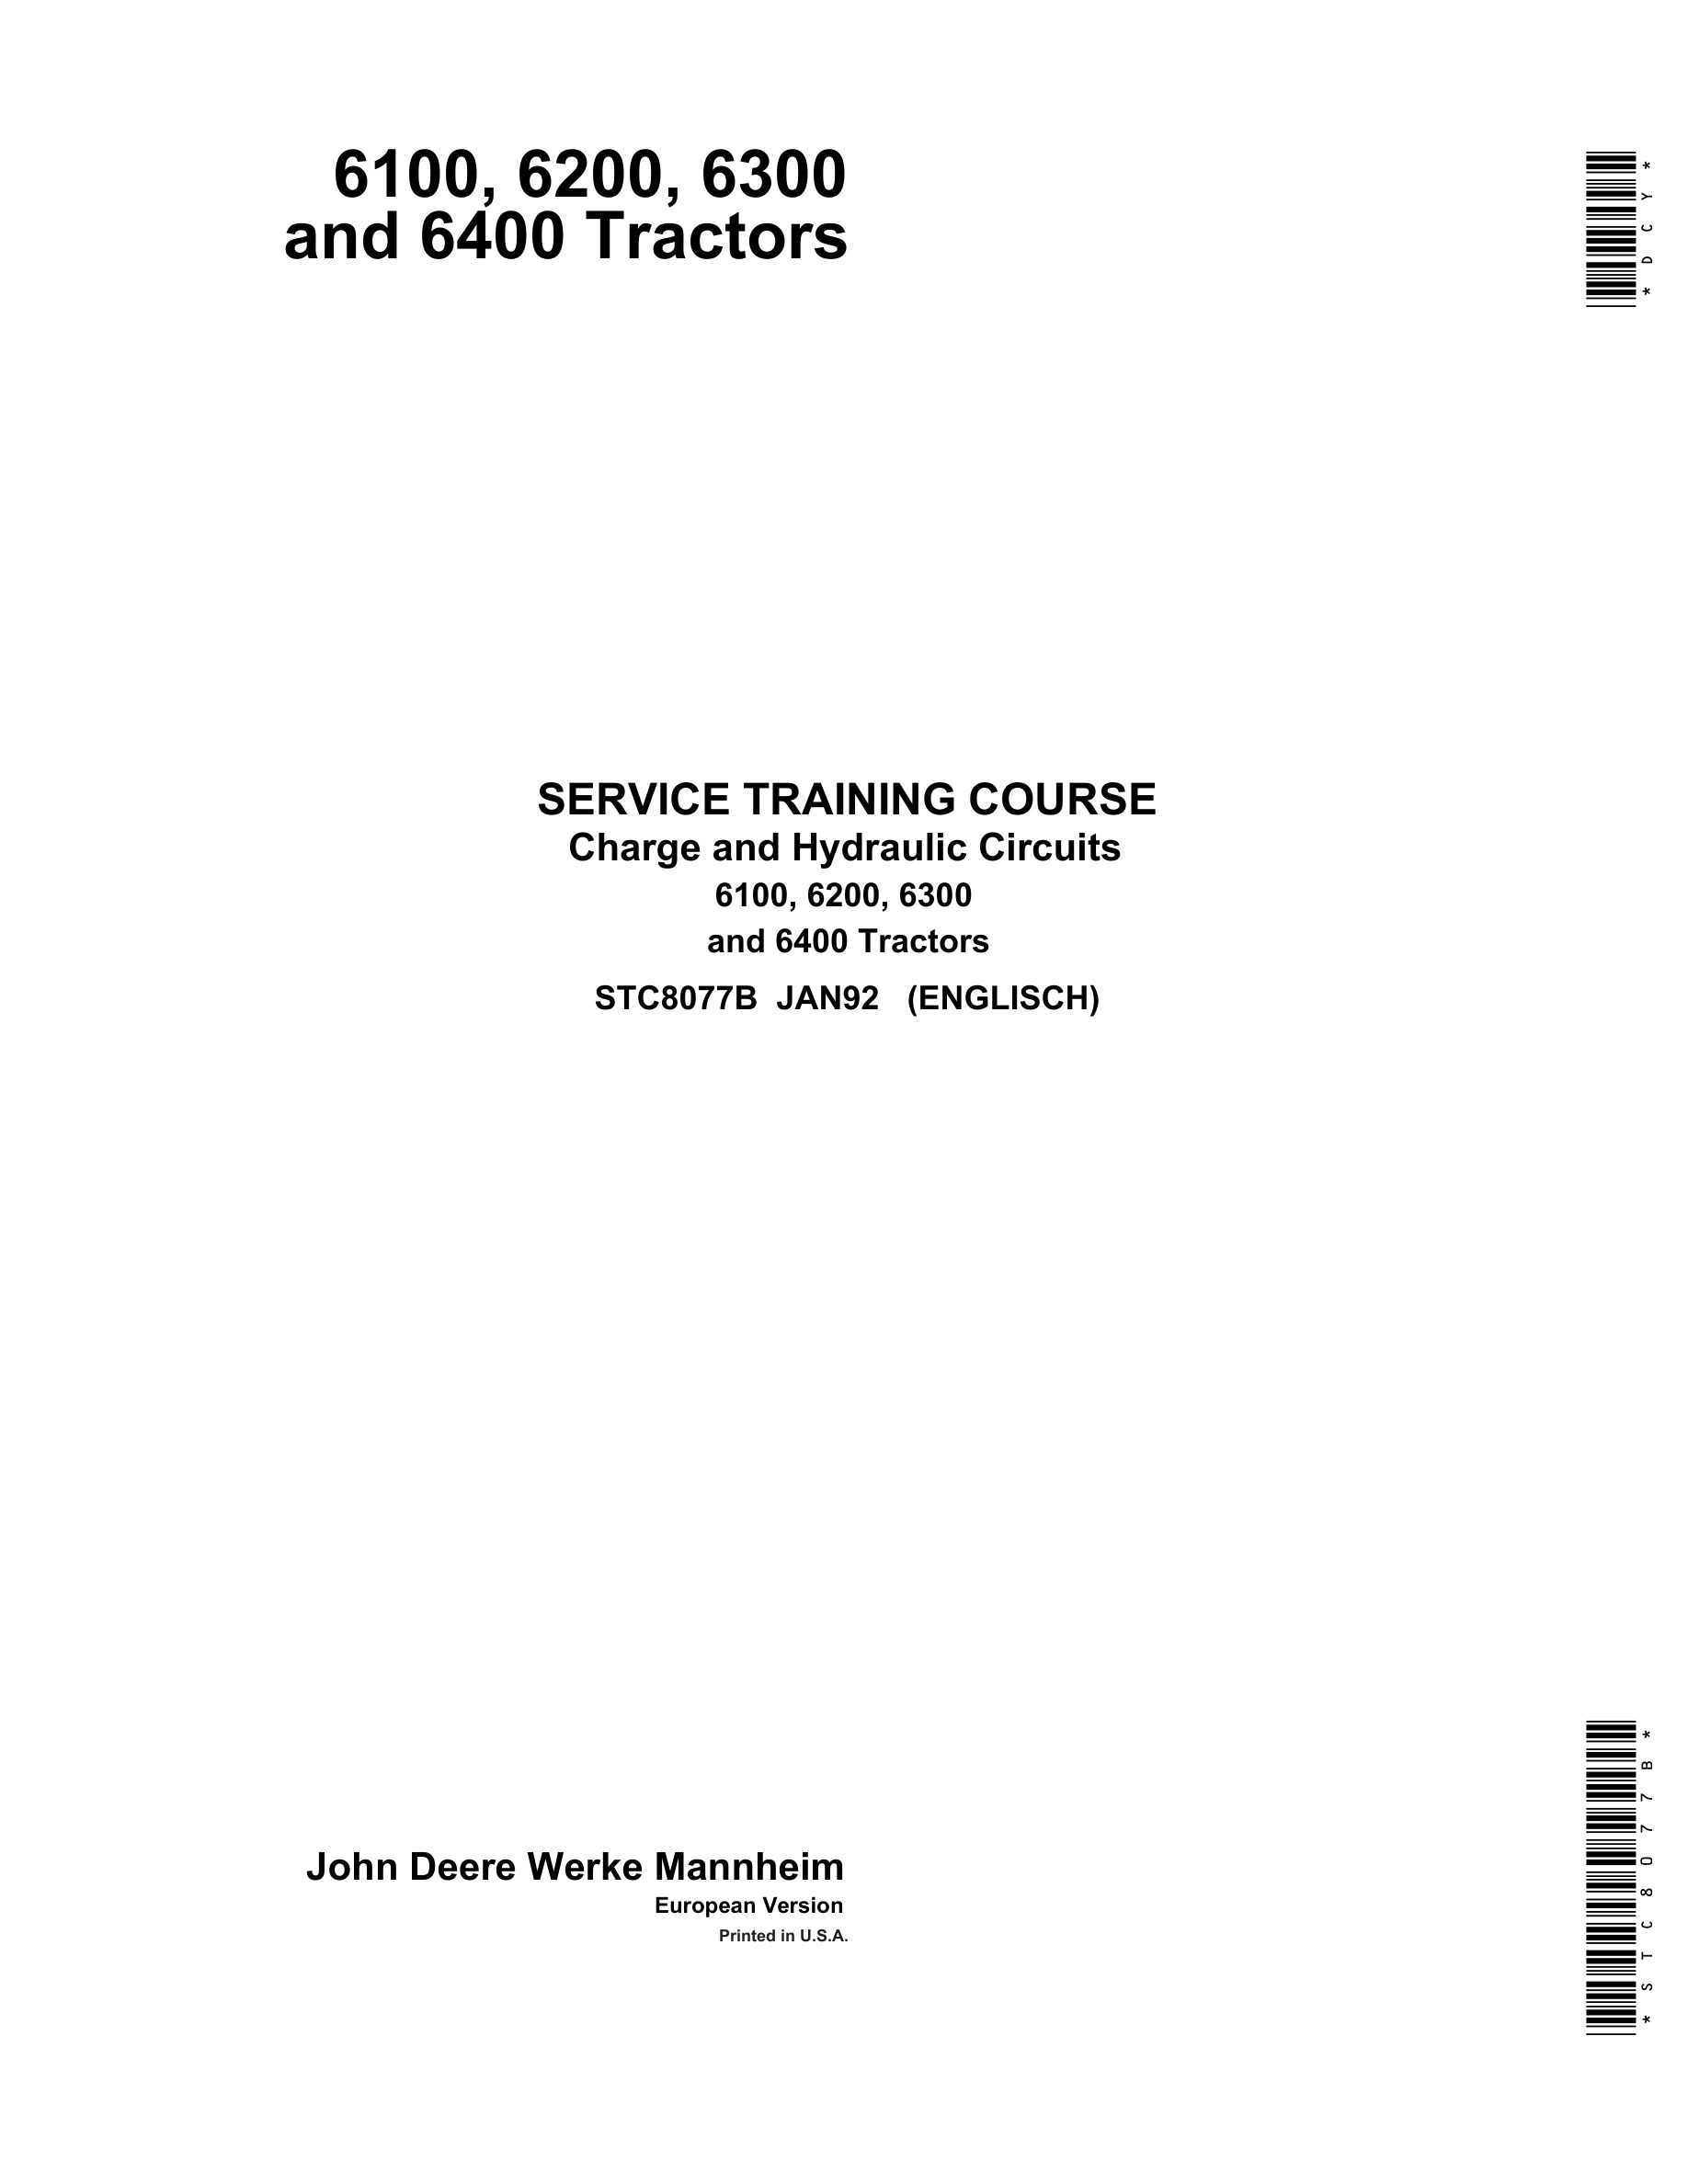 John Deere Charge And Hydraulic Circuits 6100, 6200, 6300 And 6400 Tractors Service Training Course STC8077B-1